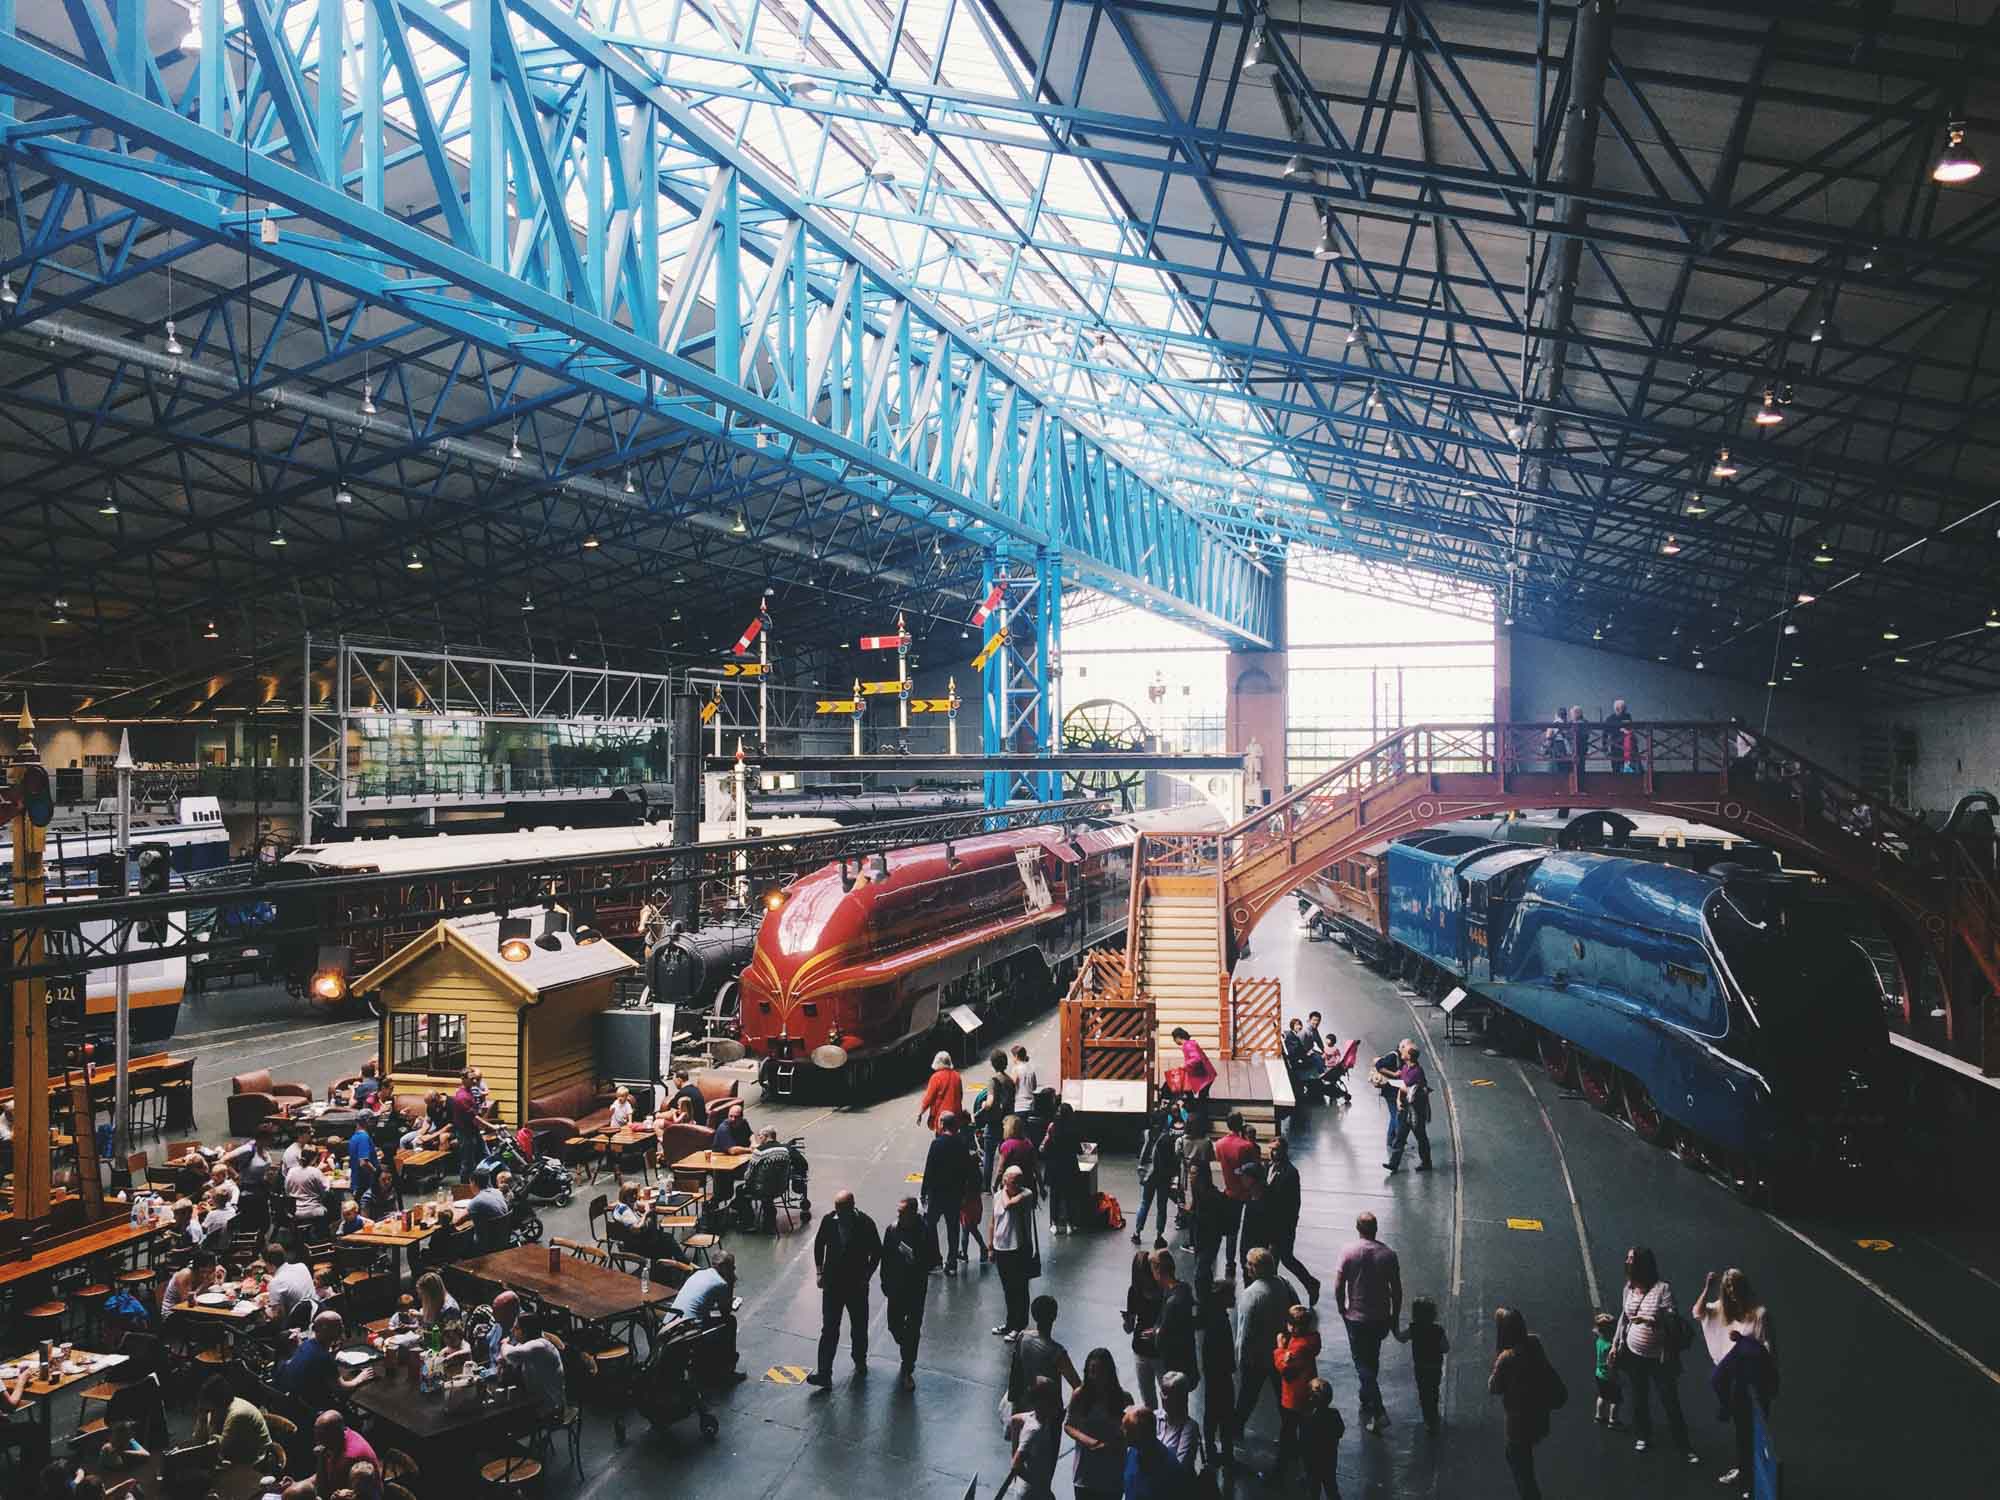 Best things to do in York - National Railway Museum